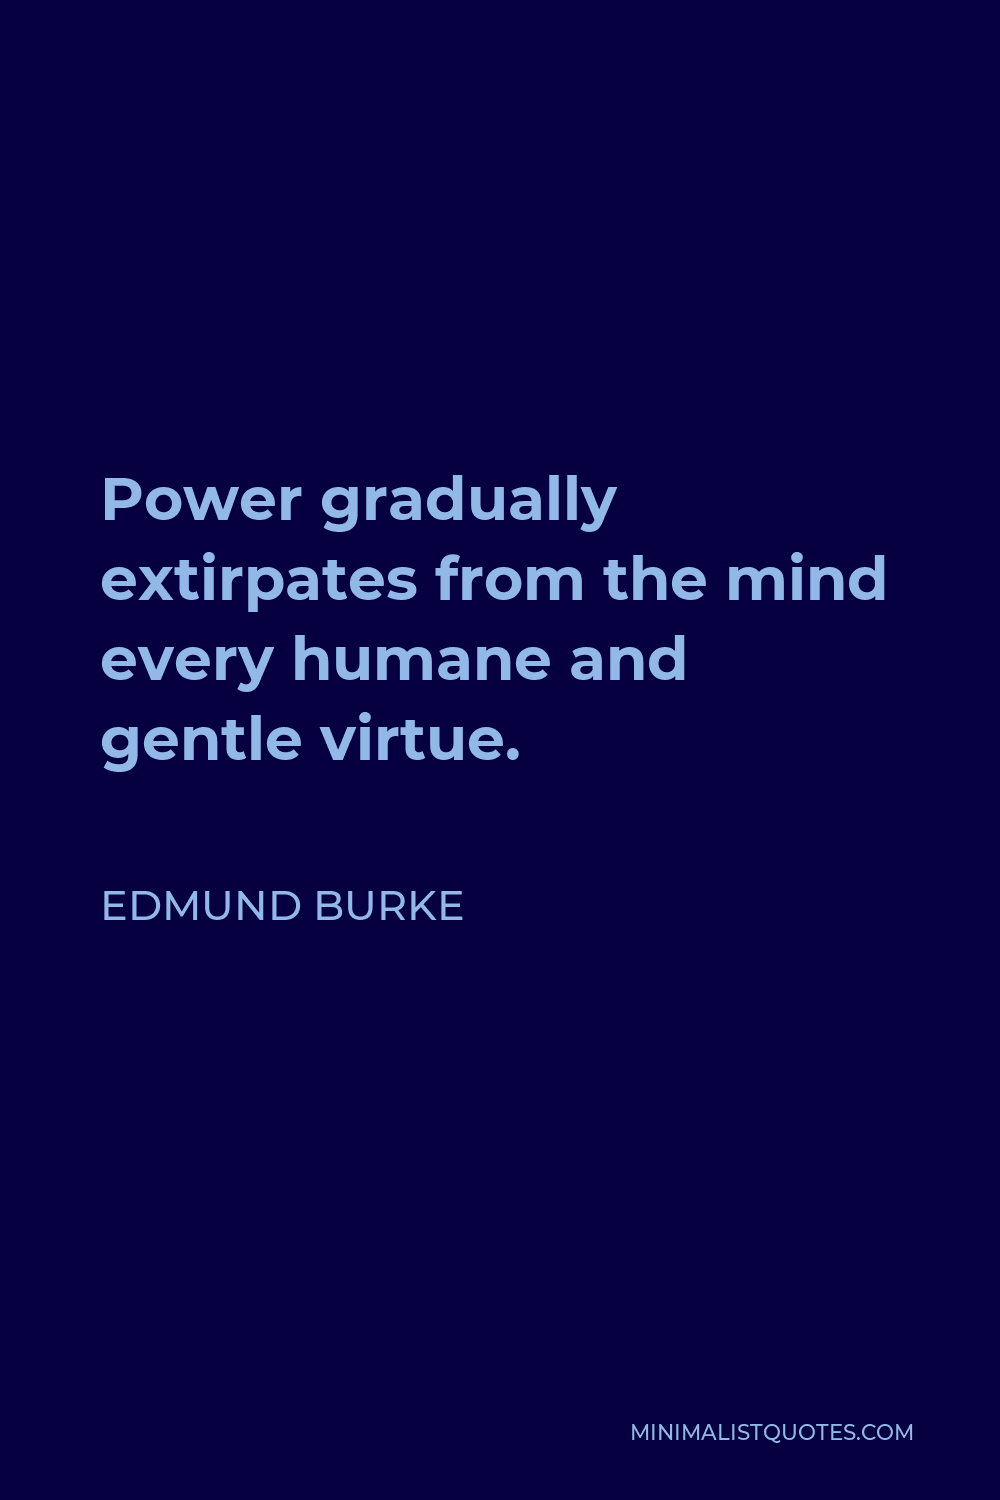 Edmund Burke Quote - Power gradually extirpates from the mind every humane and gentle virtue.